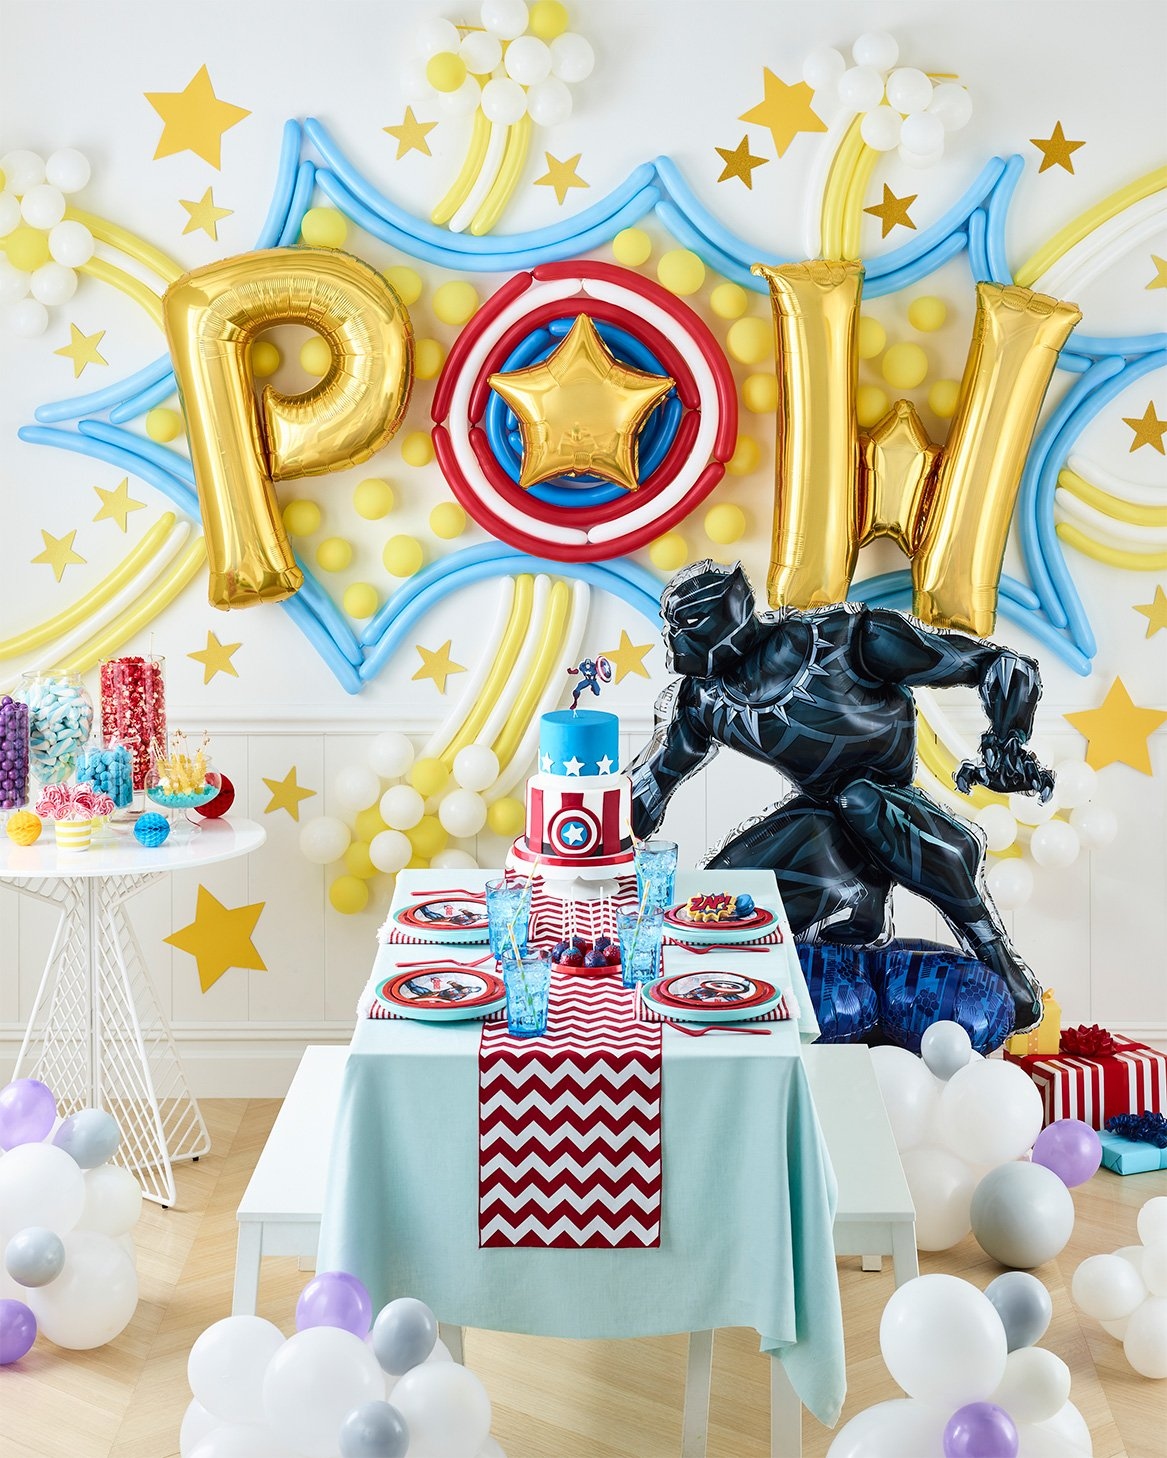 1 NEW  THE AVENGERS BIRTHDAY PARTY PACK 